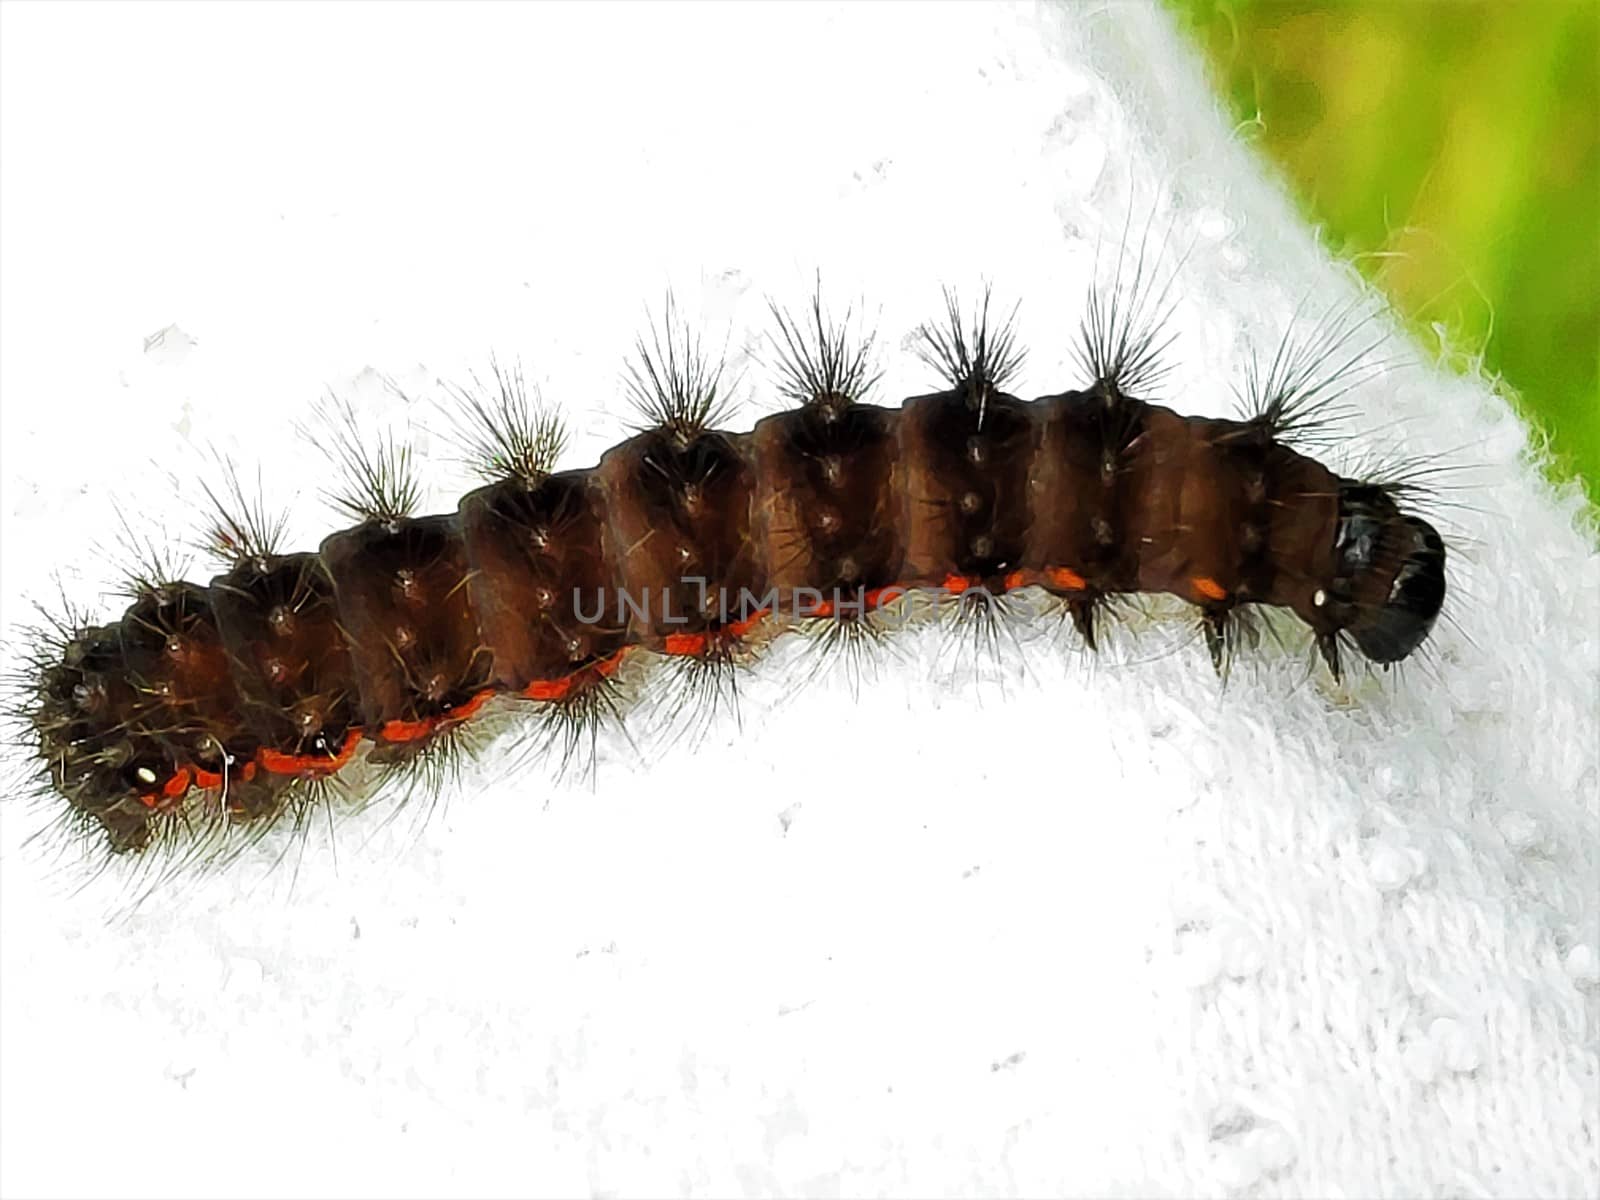 Black-brownish and orange catterpillar spotted on some wool material by pisces2386